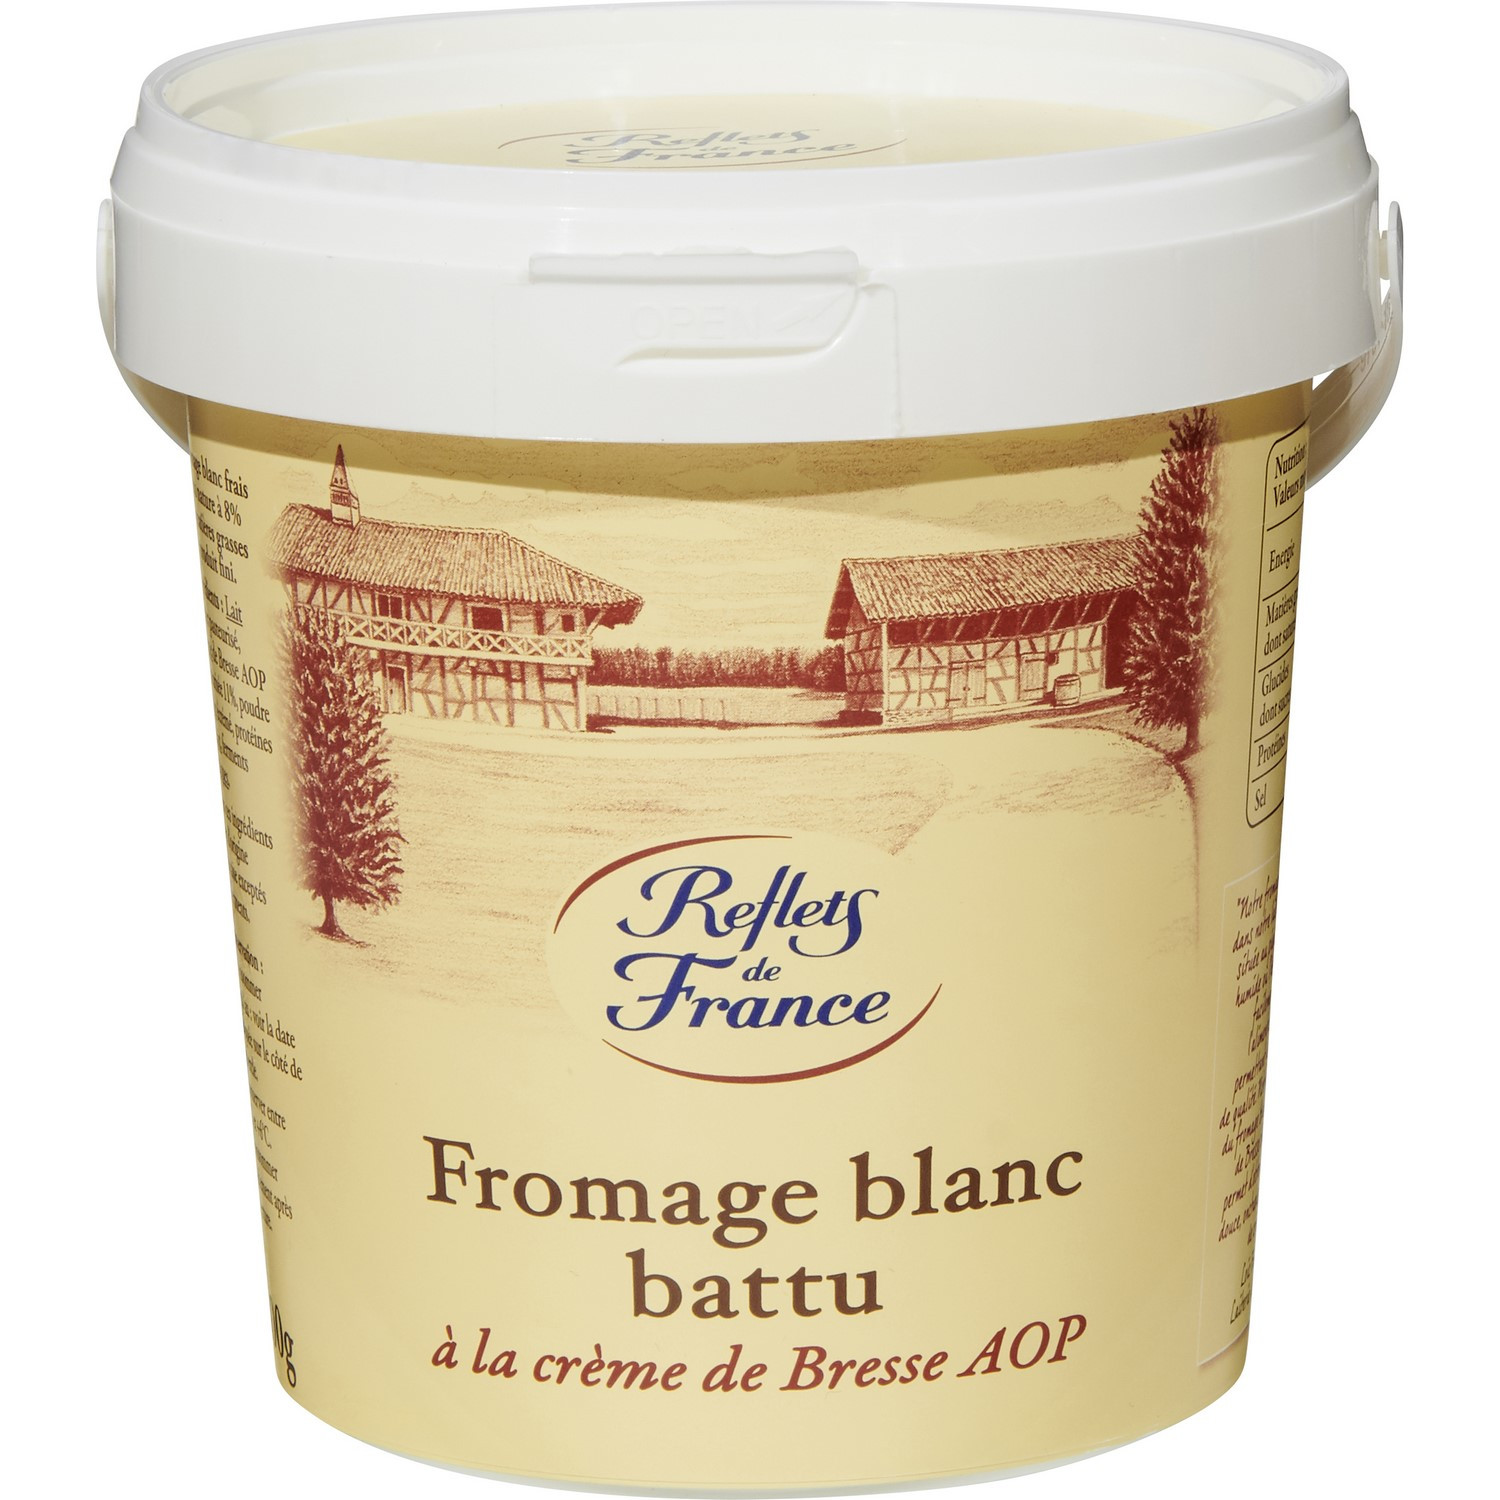 Reflets de France whipped Cottage Cheese with cream 8% FAT 800g